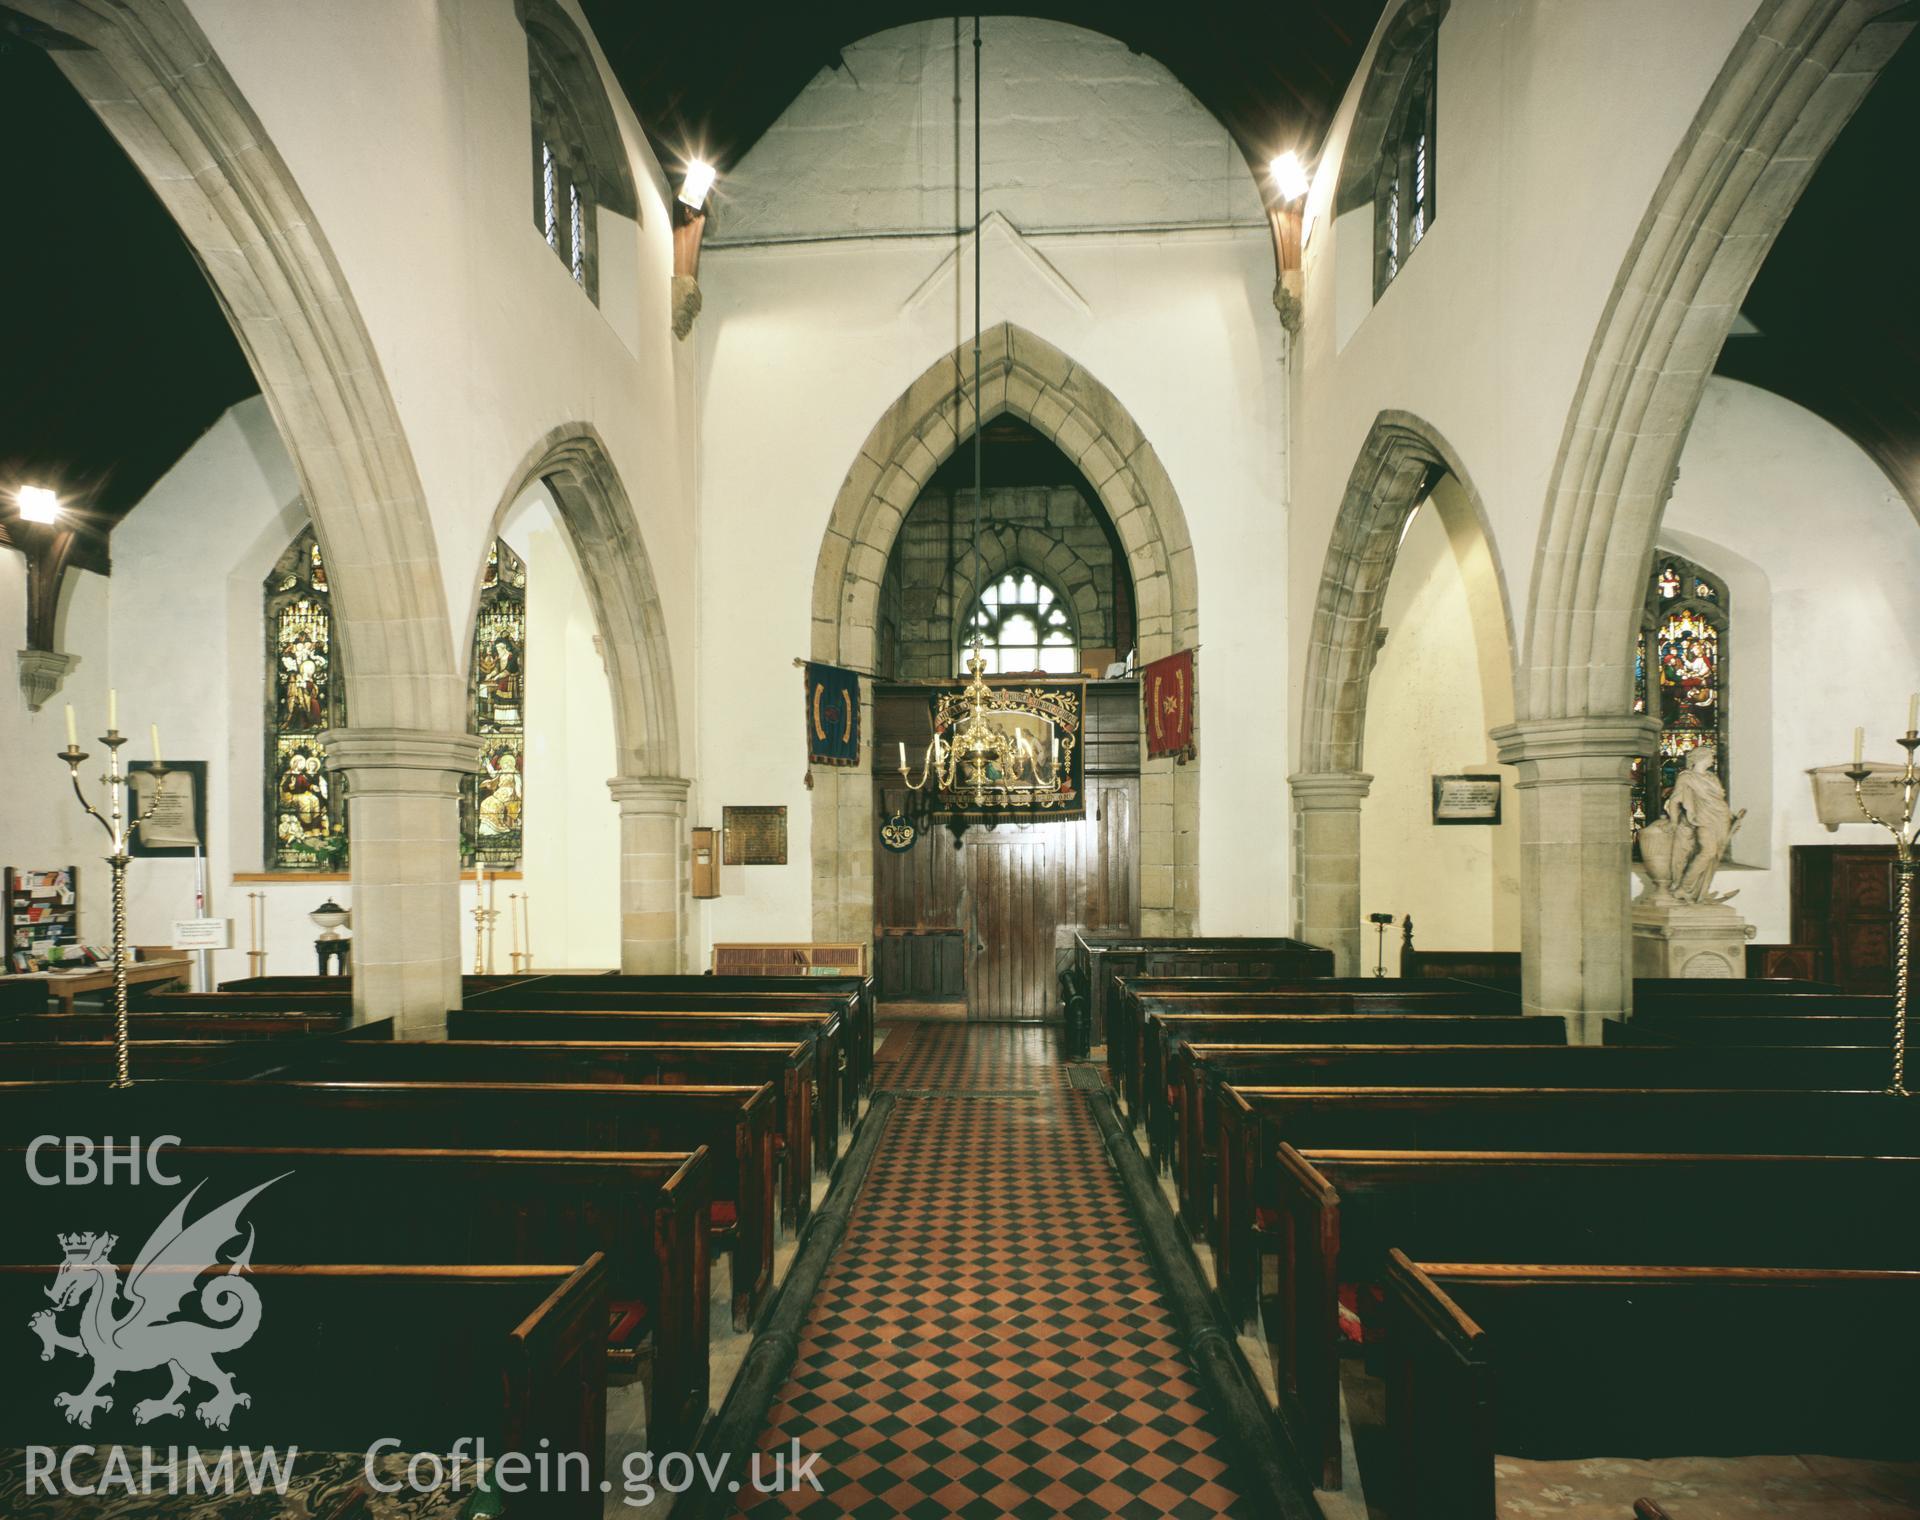 RCAHMW colour transparency showing interior view of Ruabon Church taken by I.N. Wright, 1979